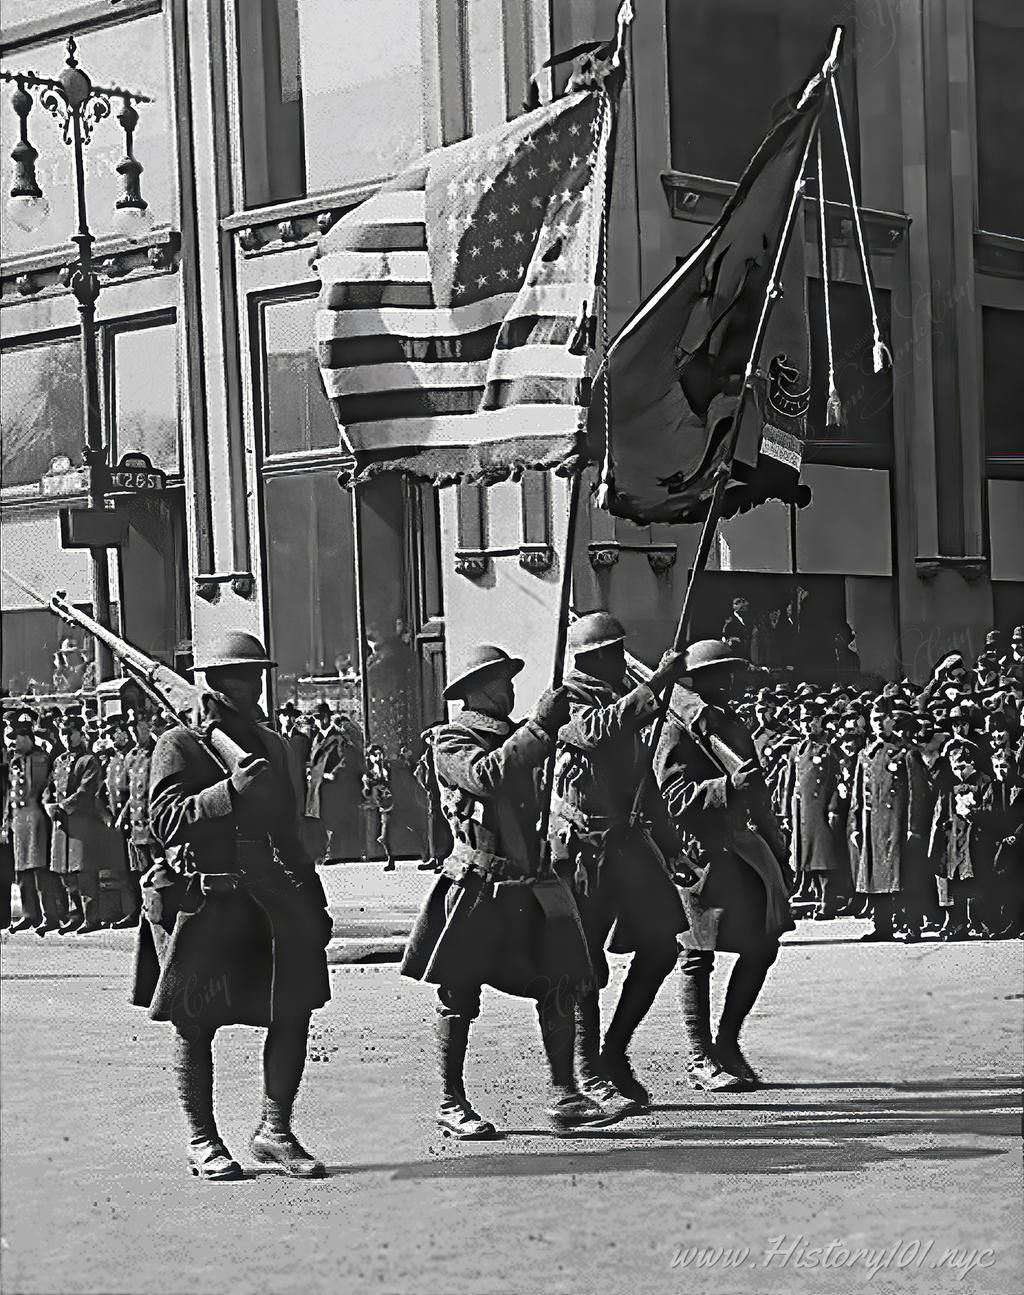 Photograph of the 369th Infantry, commonly referred to as "The Harlem Hellfighters" waving an American flag and their infantry colors.